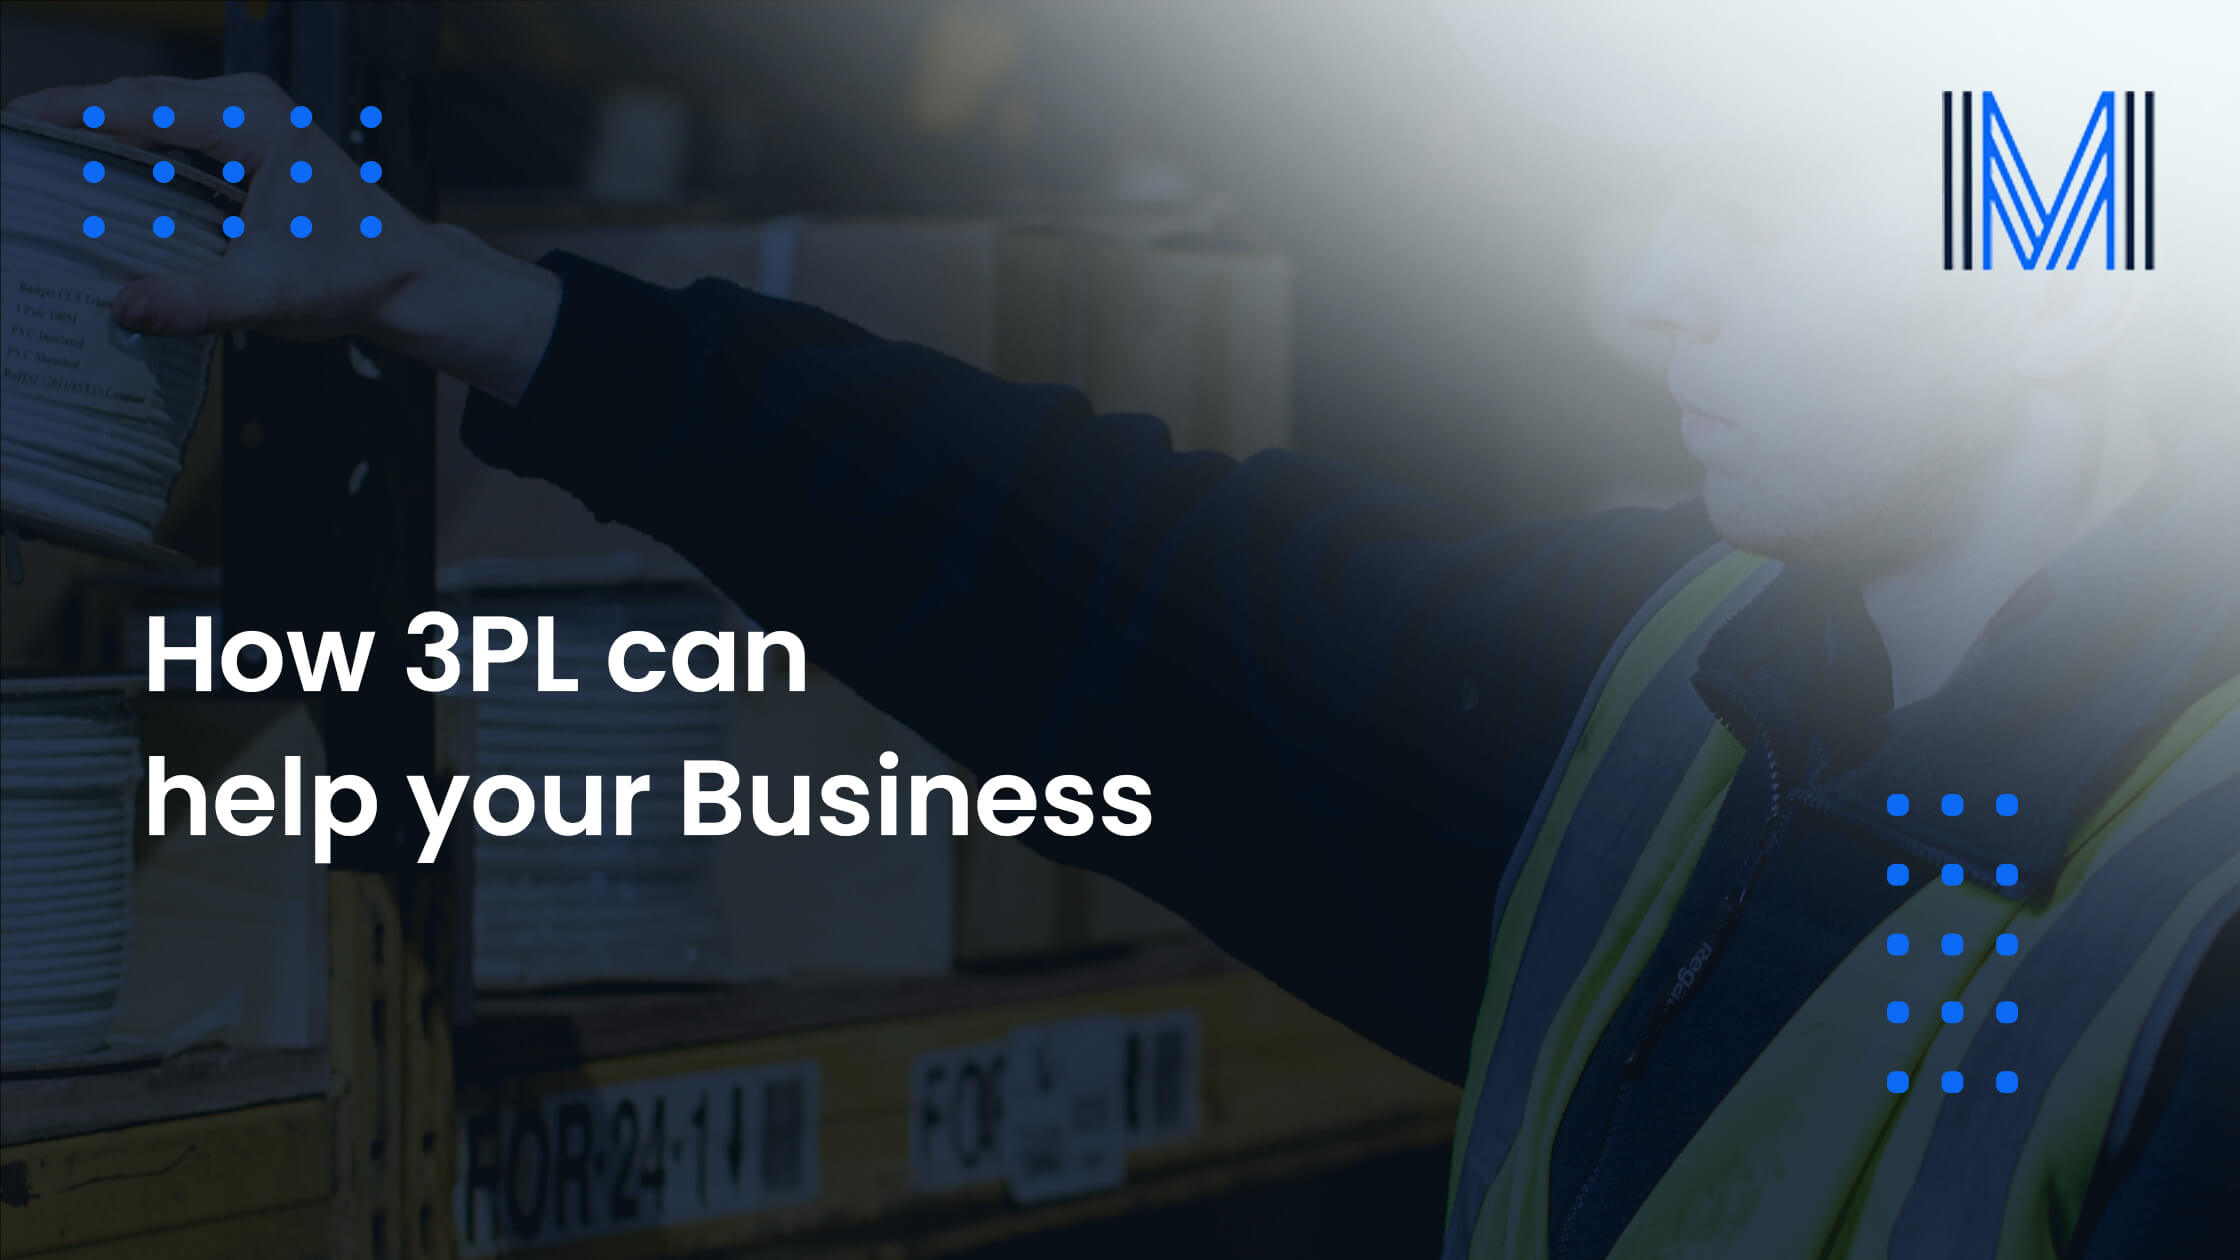 How 3PL can help your Business